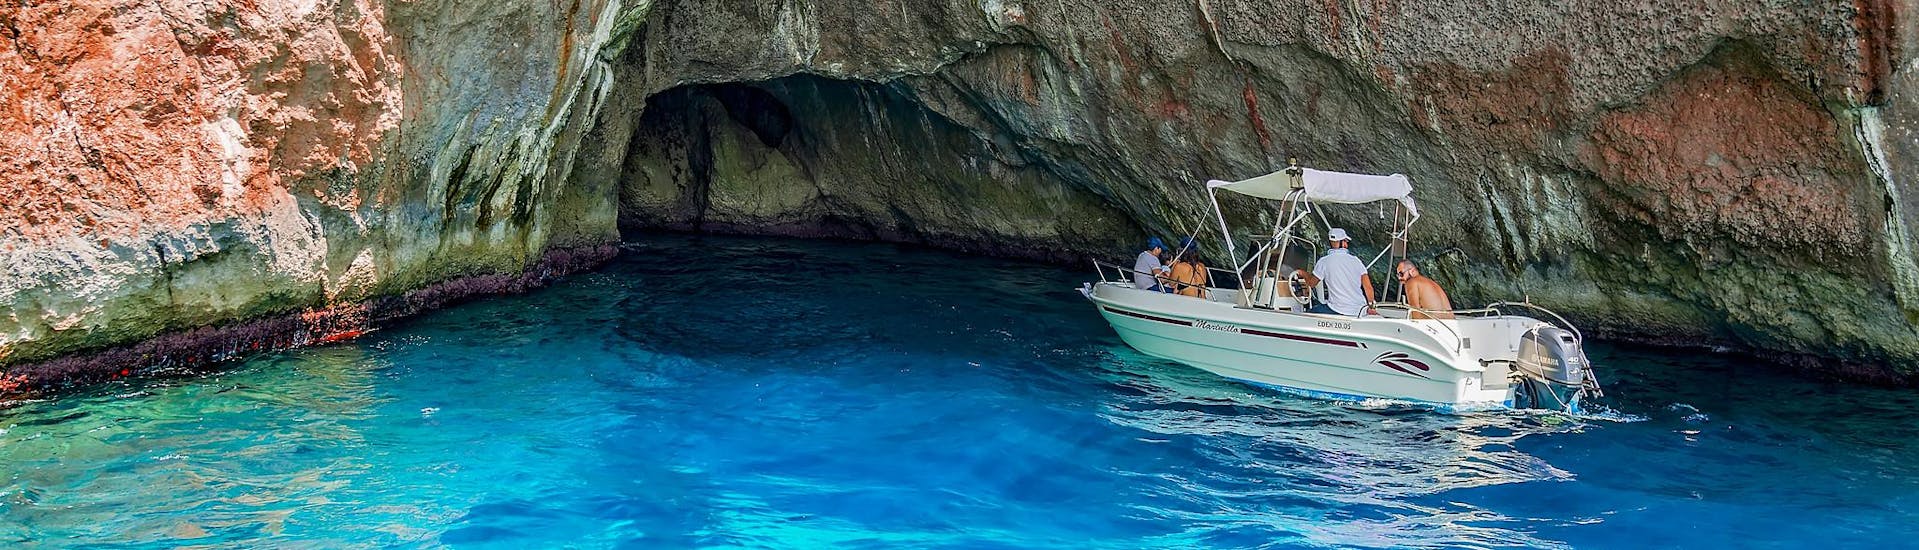 Group of people heading into a sea cave enjoy a boat rental activity where no license is needed